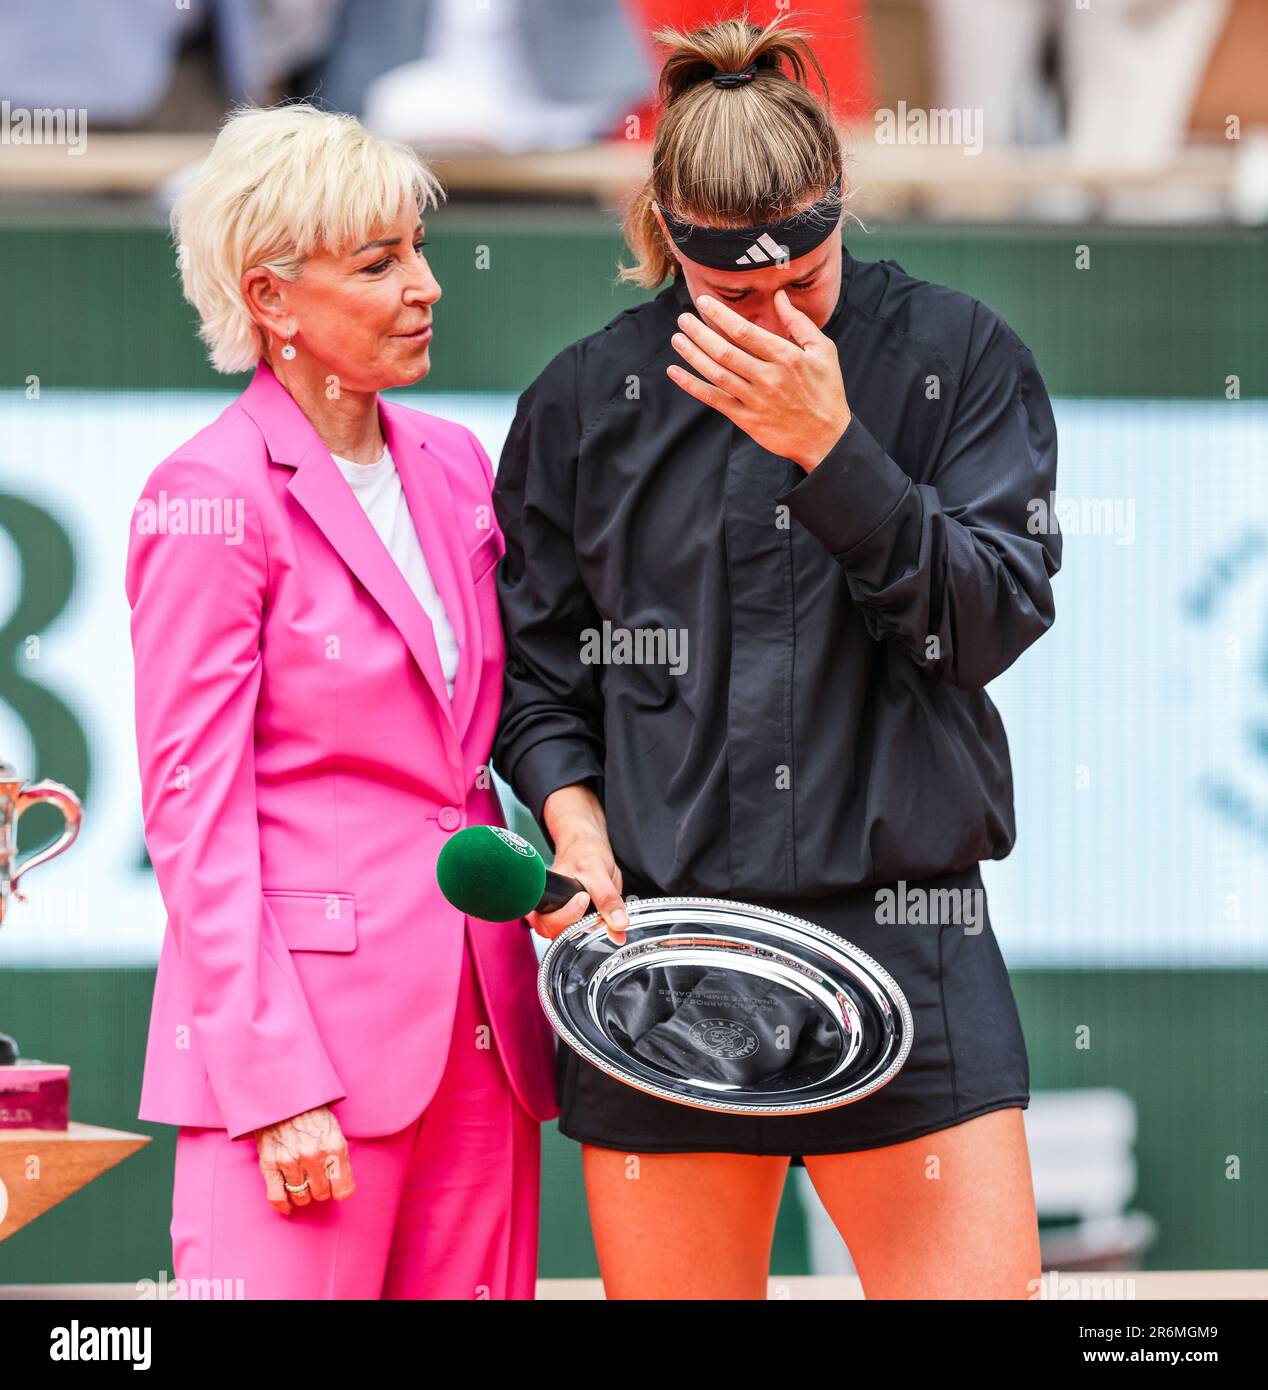 Paris, France. 10th June, 2023. Tennis player Karolina Muchova (CZE) and Chris Evert at the 2023 French Open Grand Slam tennis tournament in Roland Garros, Paris, France. Frank Molter/Alamy Live news Stock Photo